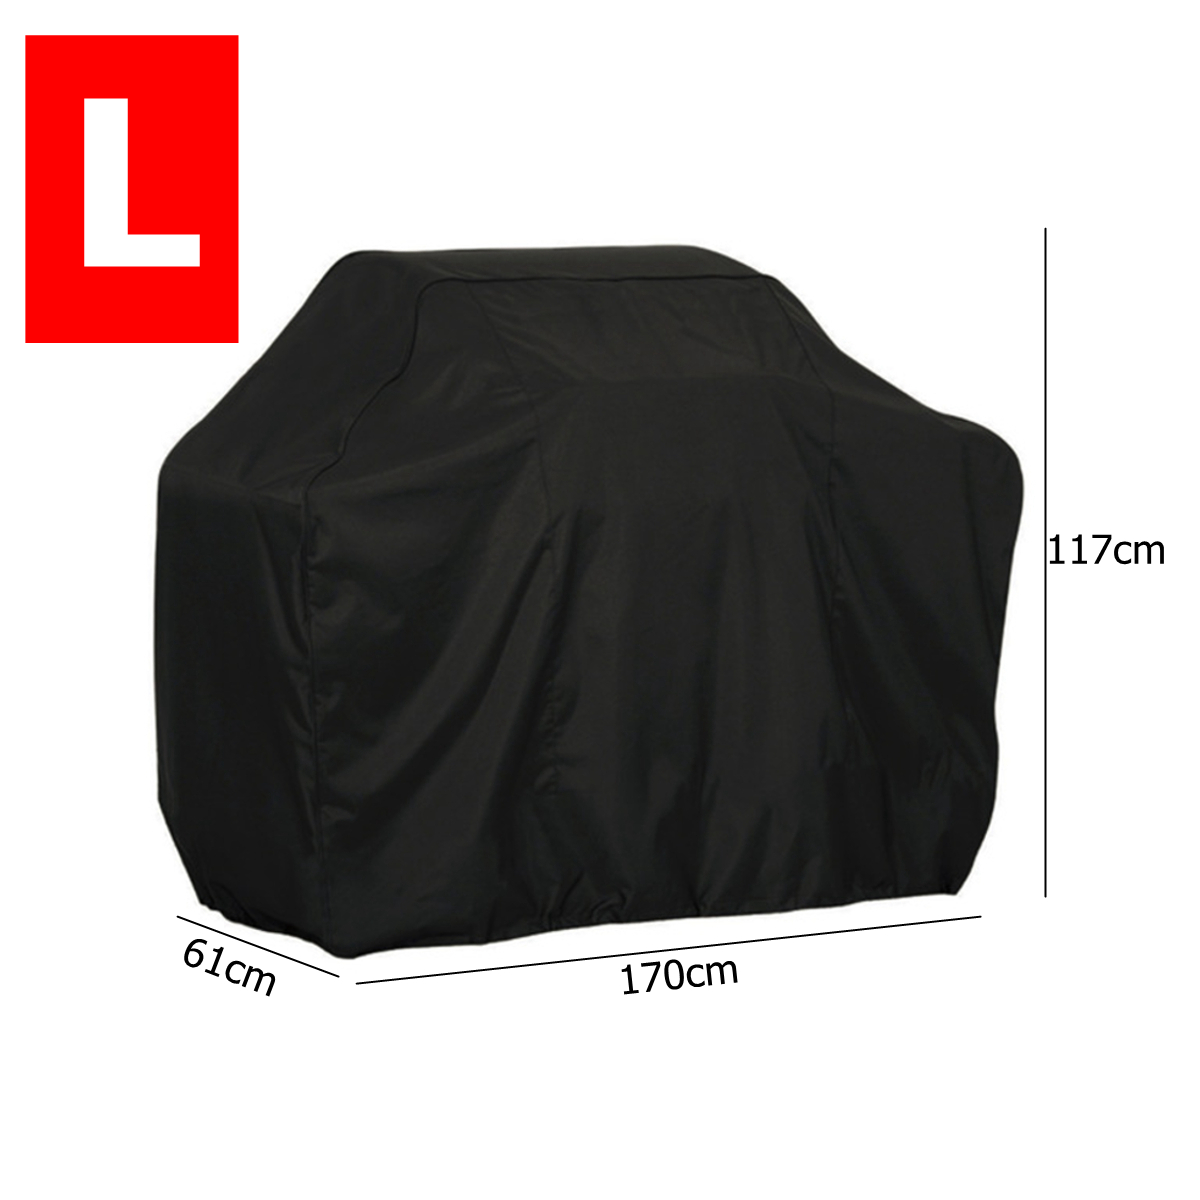 Waterproof-Black-Barbecue-Cover-Anti-Dust-Rain-Cover-Garden-Yard-Grill-Cover-Protector-For-Outdoor-B-1742519-6